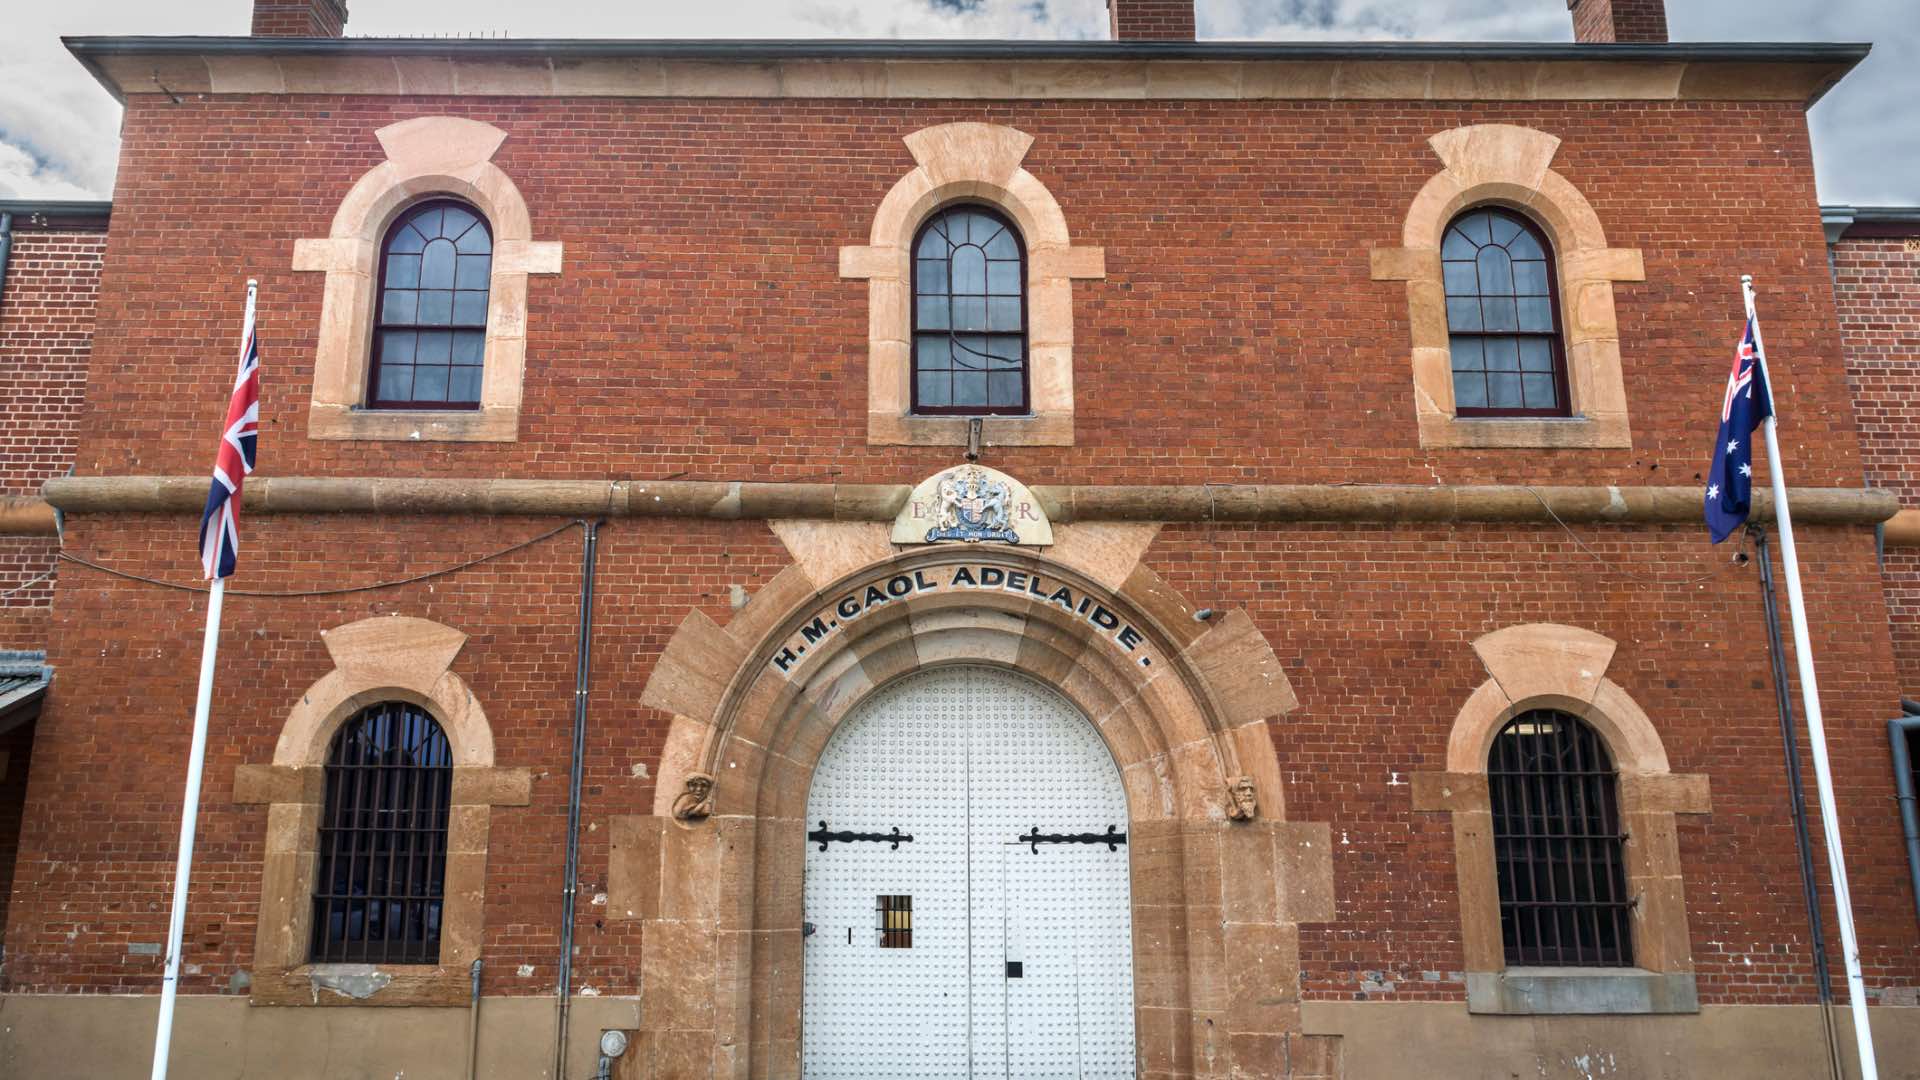 An exterior shot of the Adelaide Gaol.